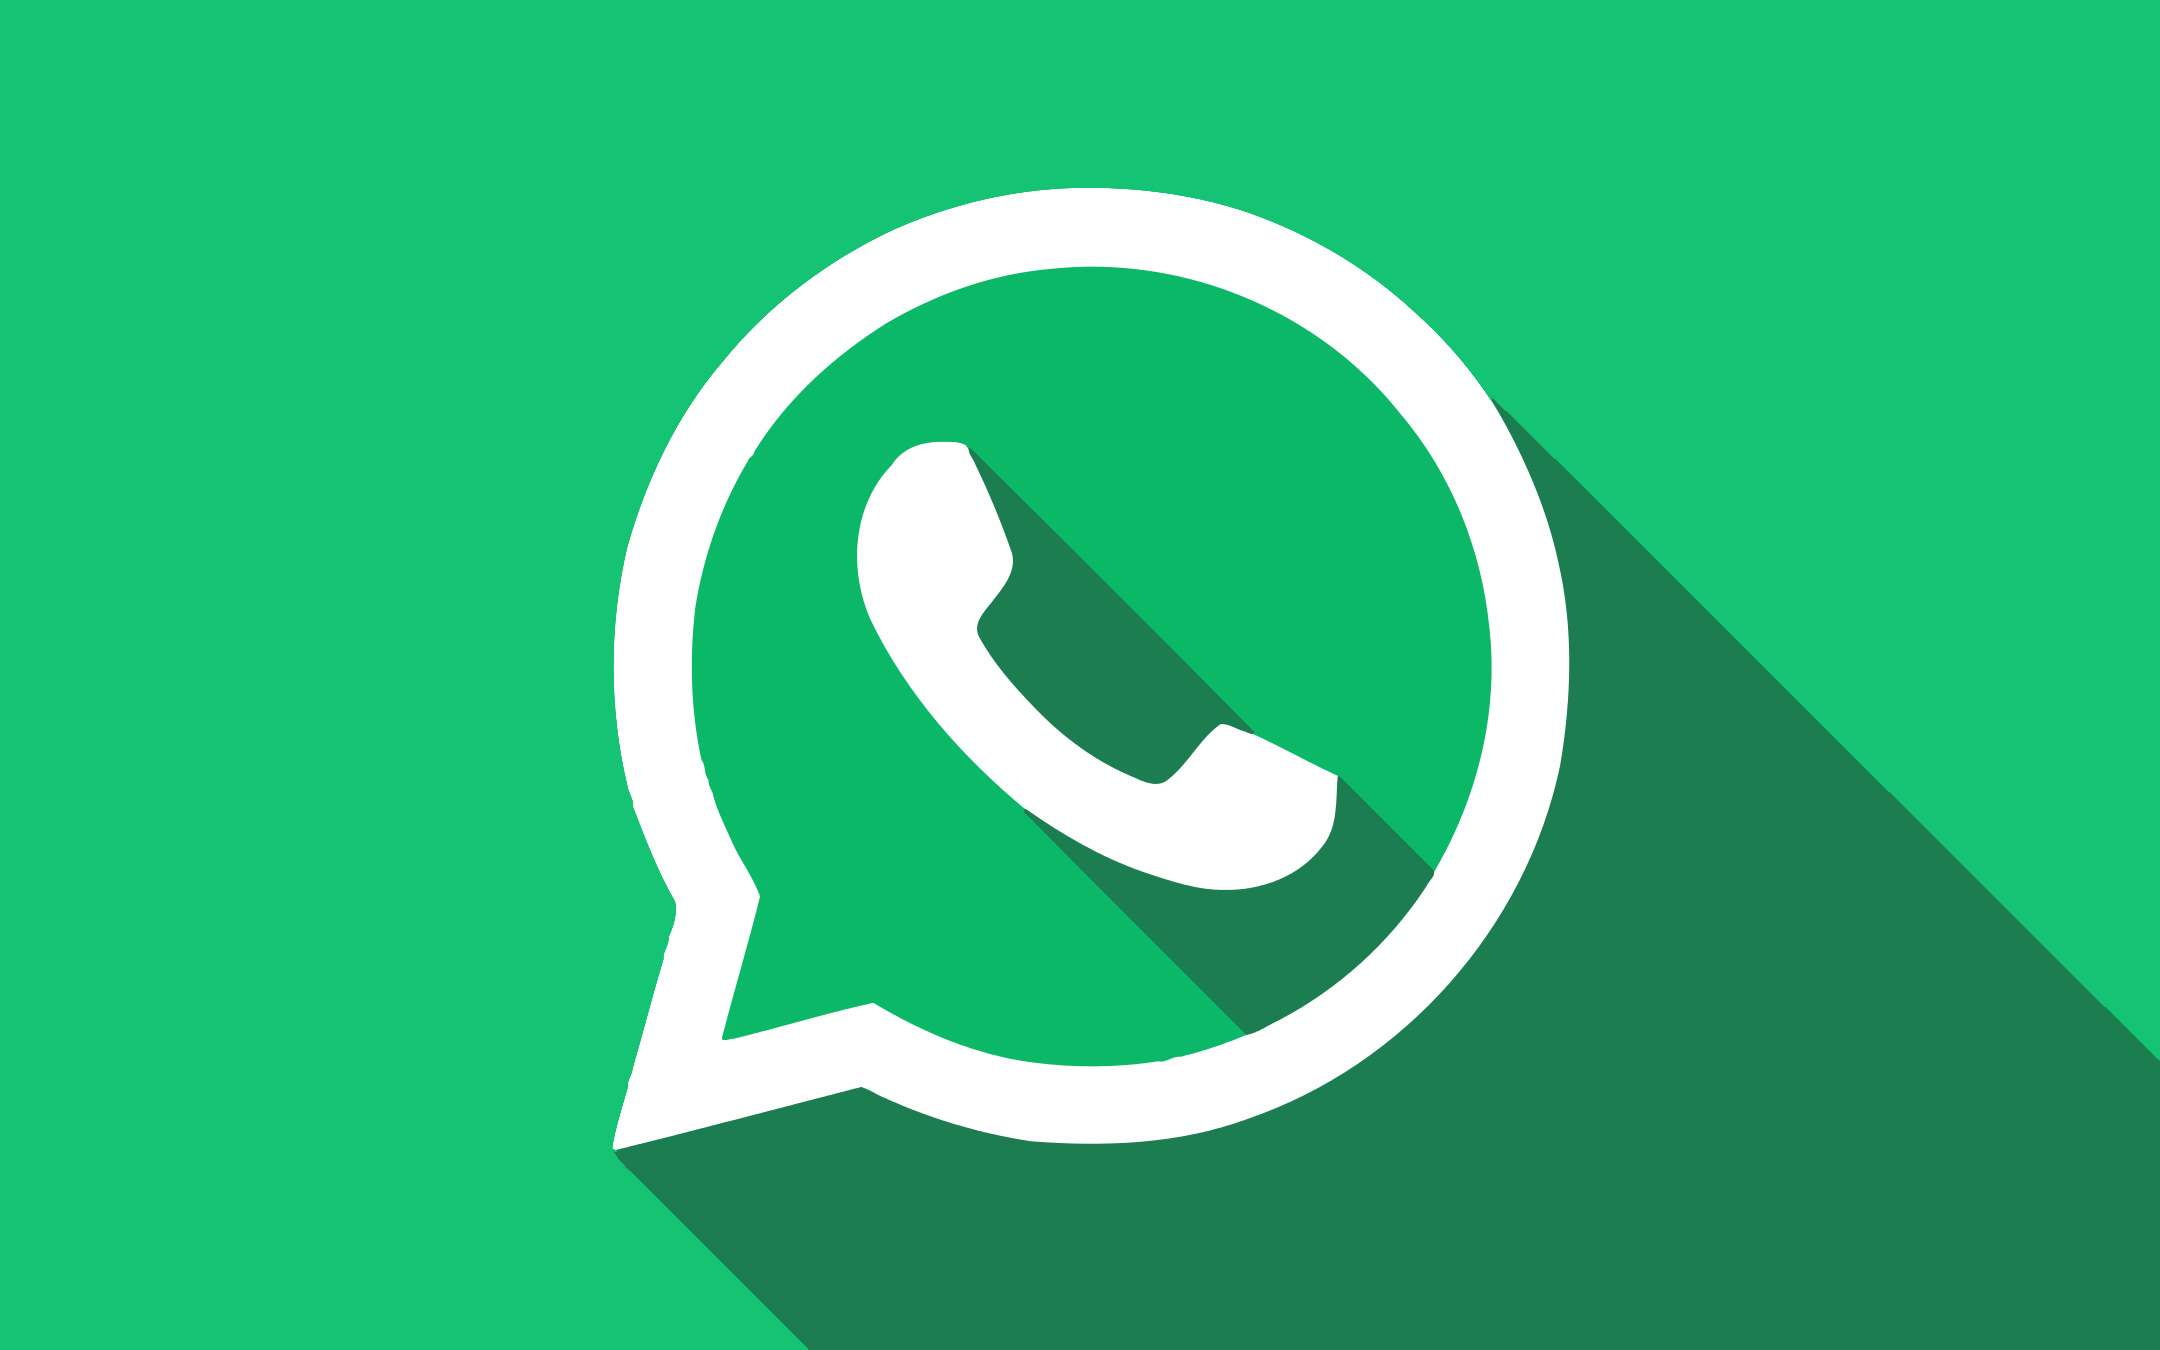 A page for WhatsApp vulnerabilities